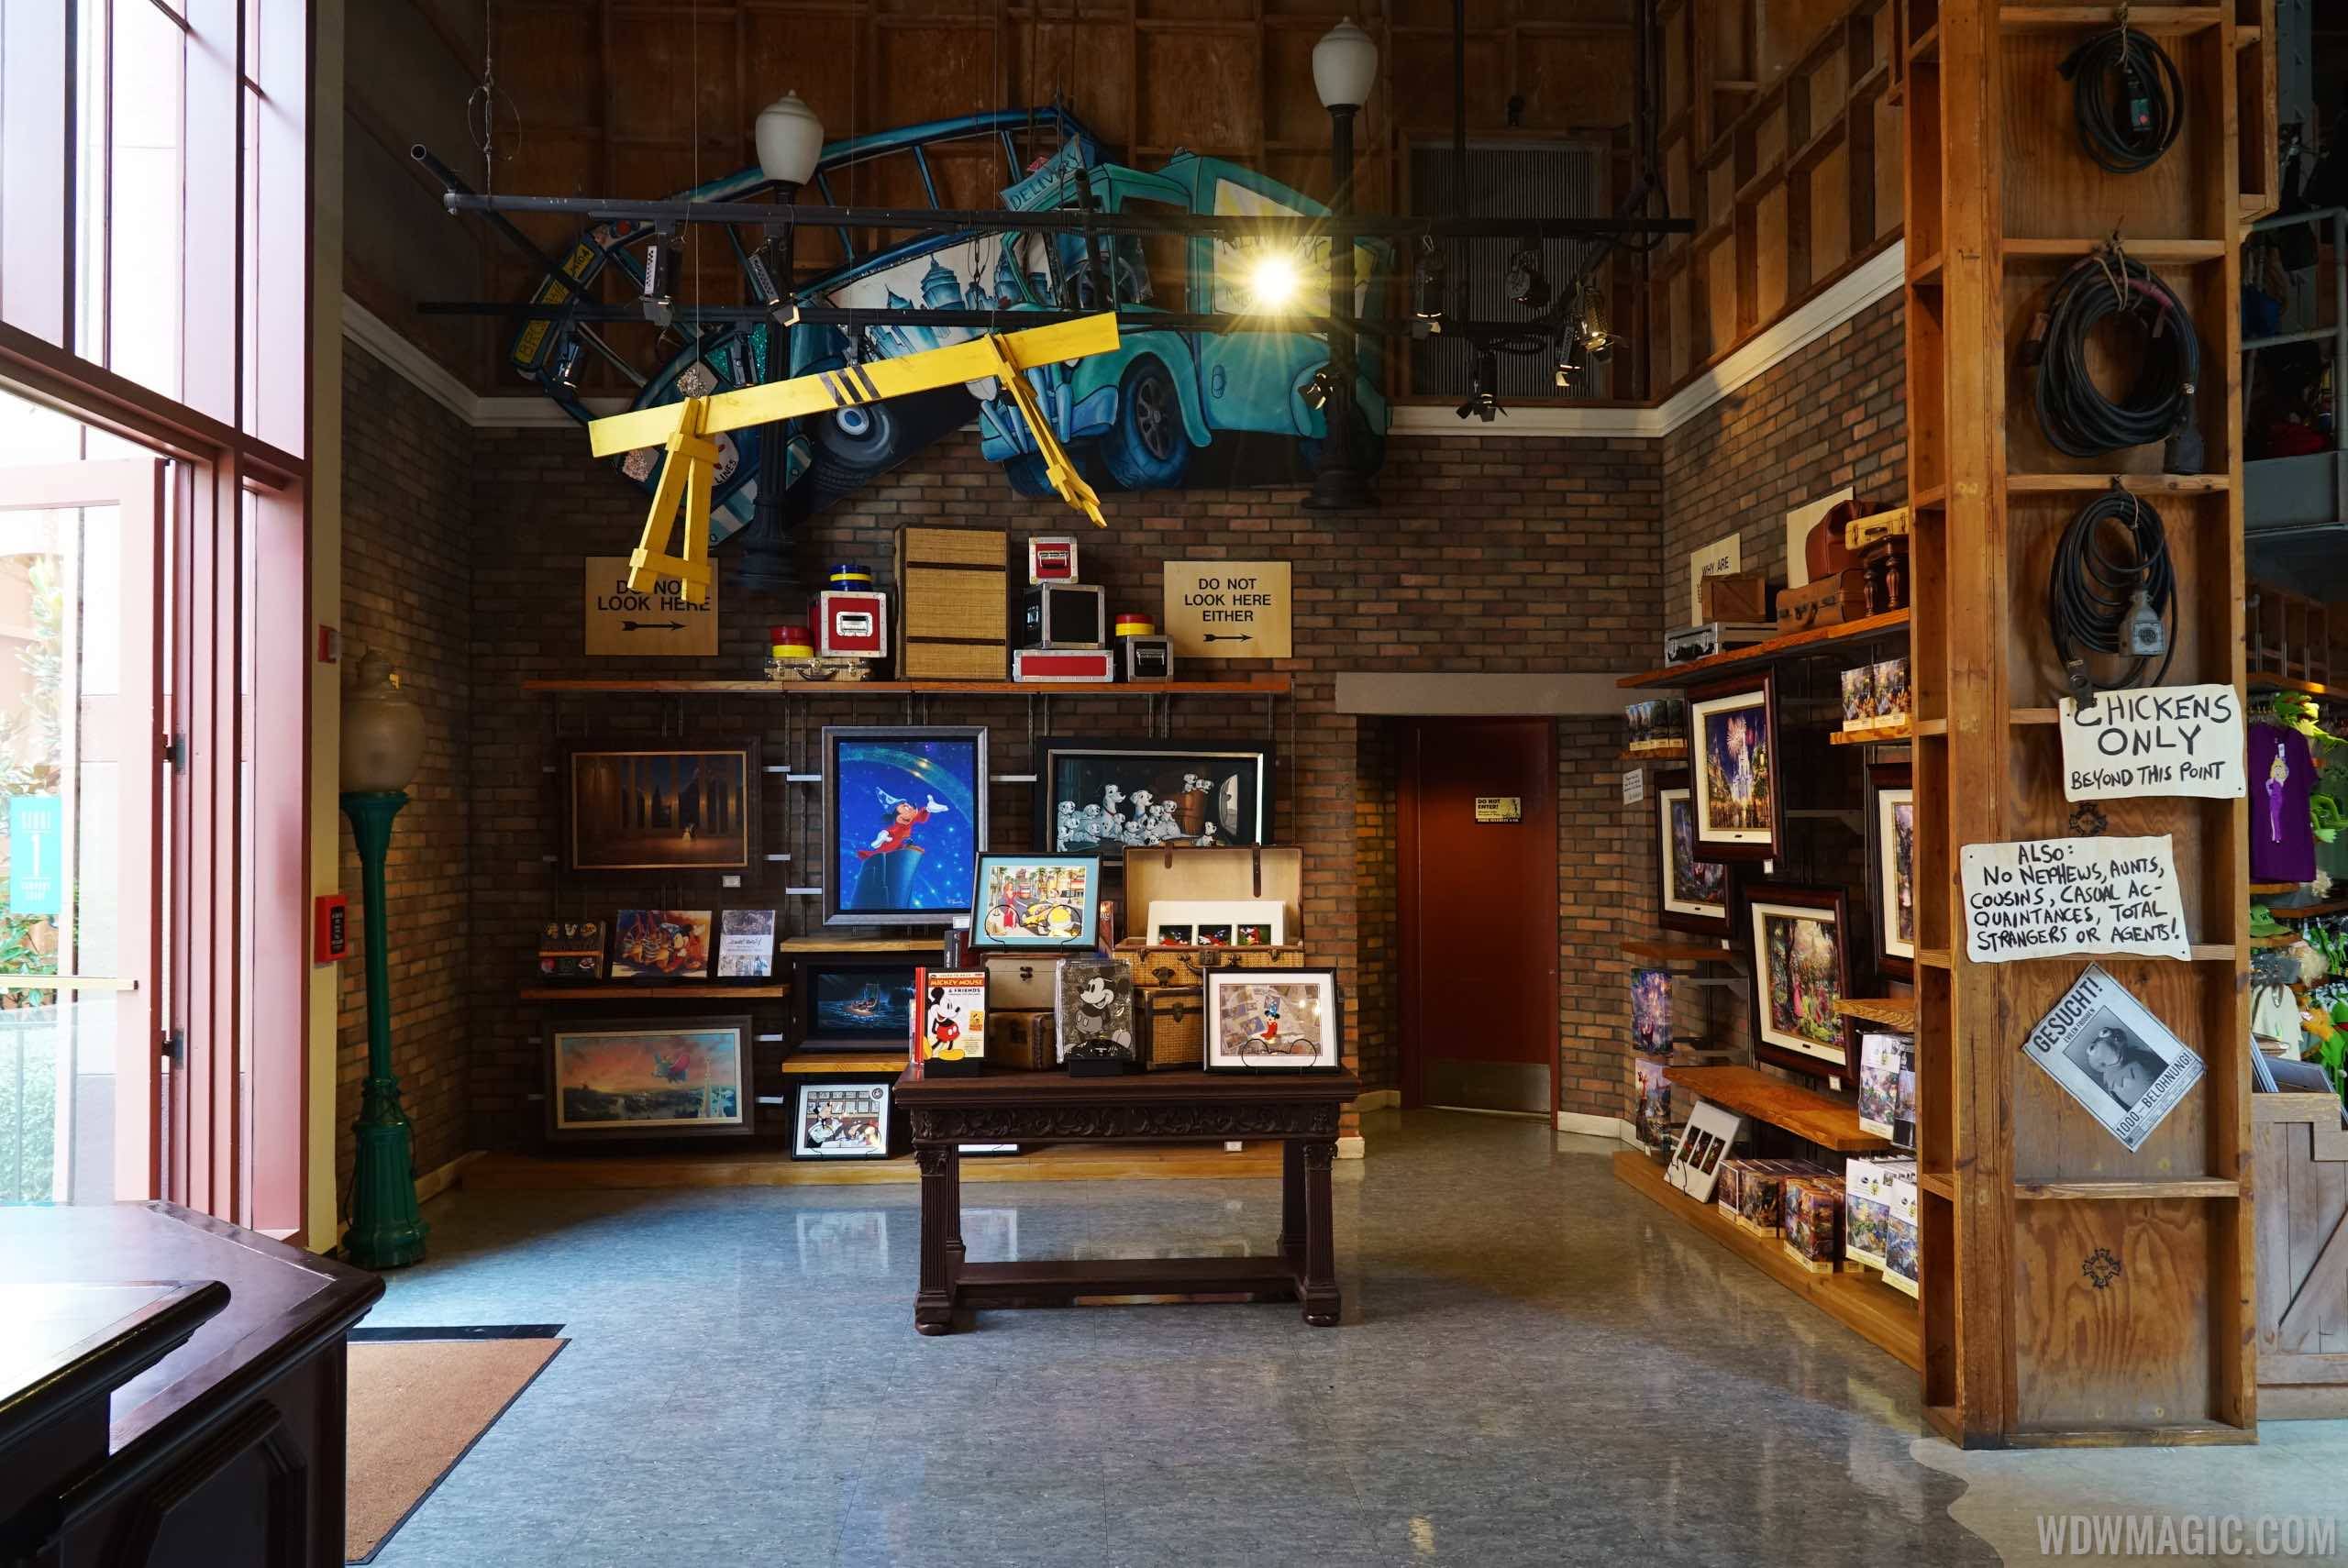 PHOTOS - Animation Gallery merchandise moves to Stage 1 on Streets of America